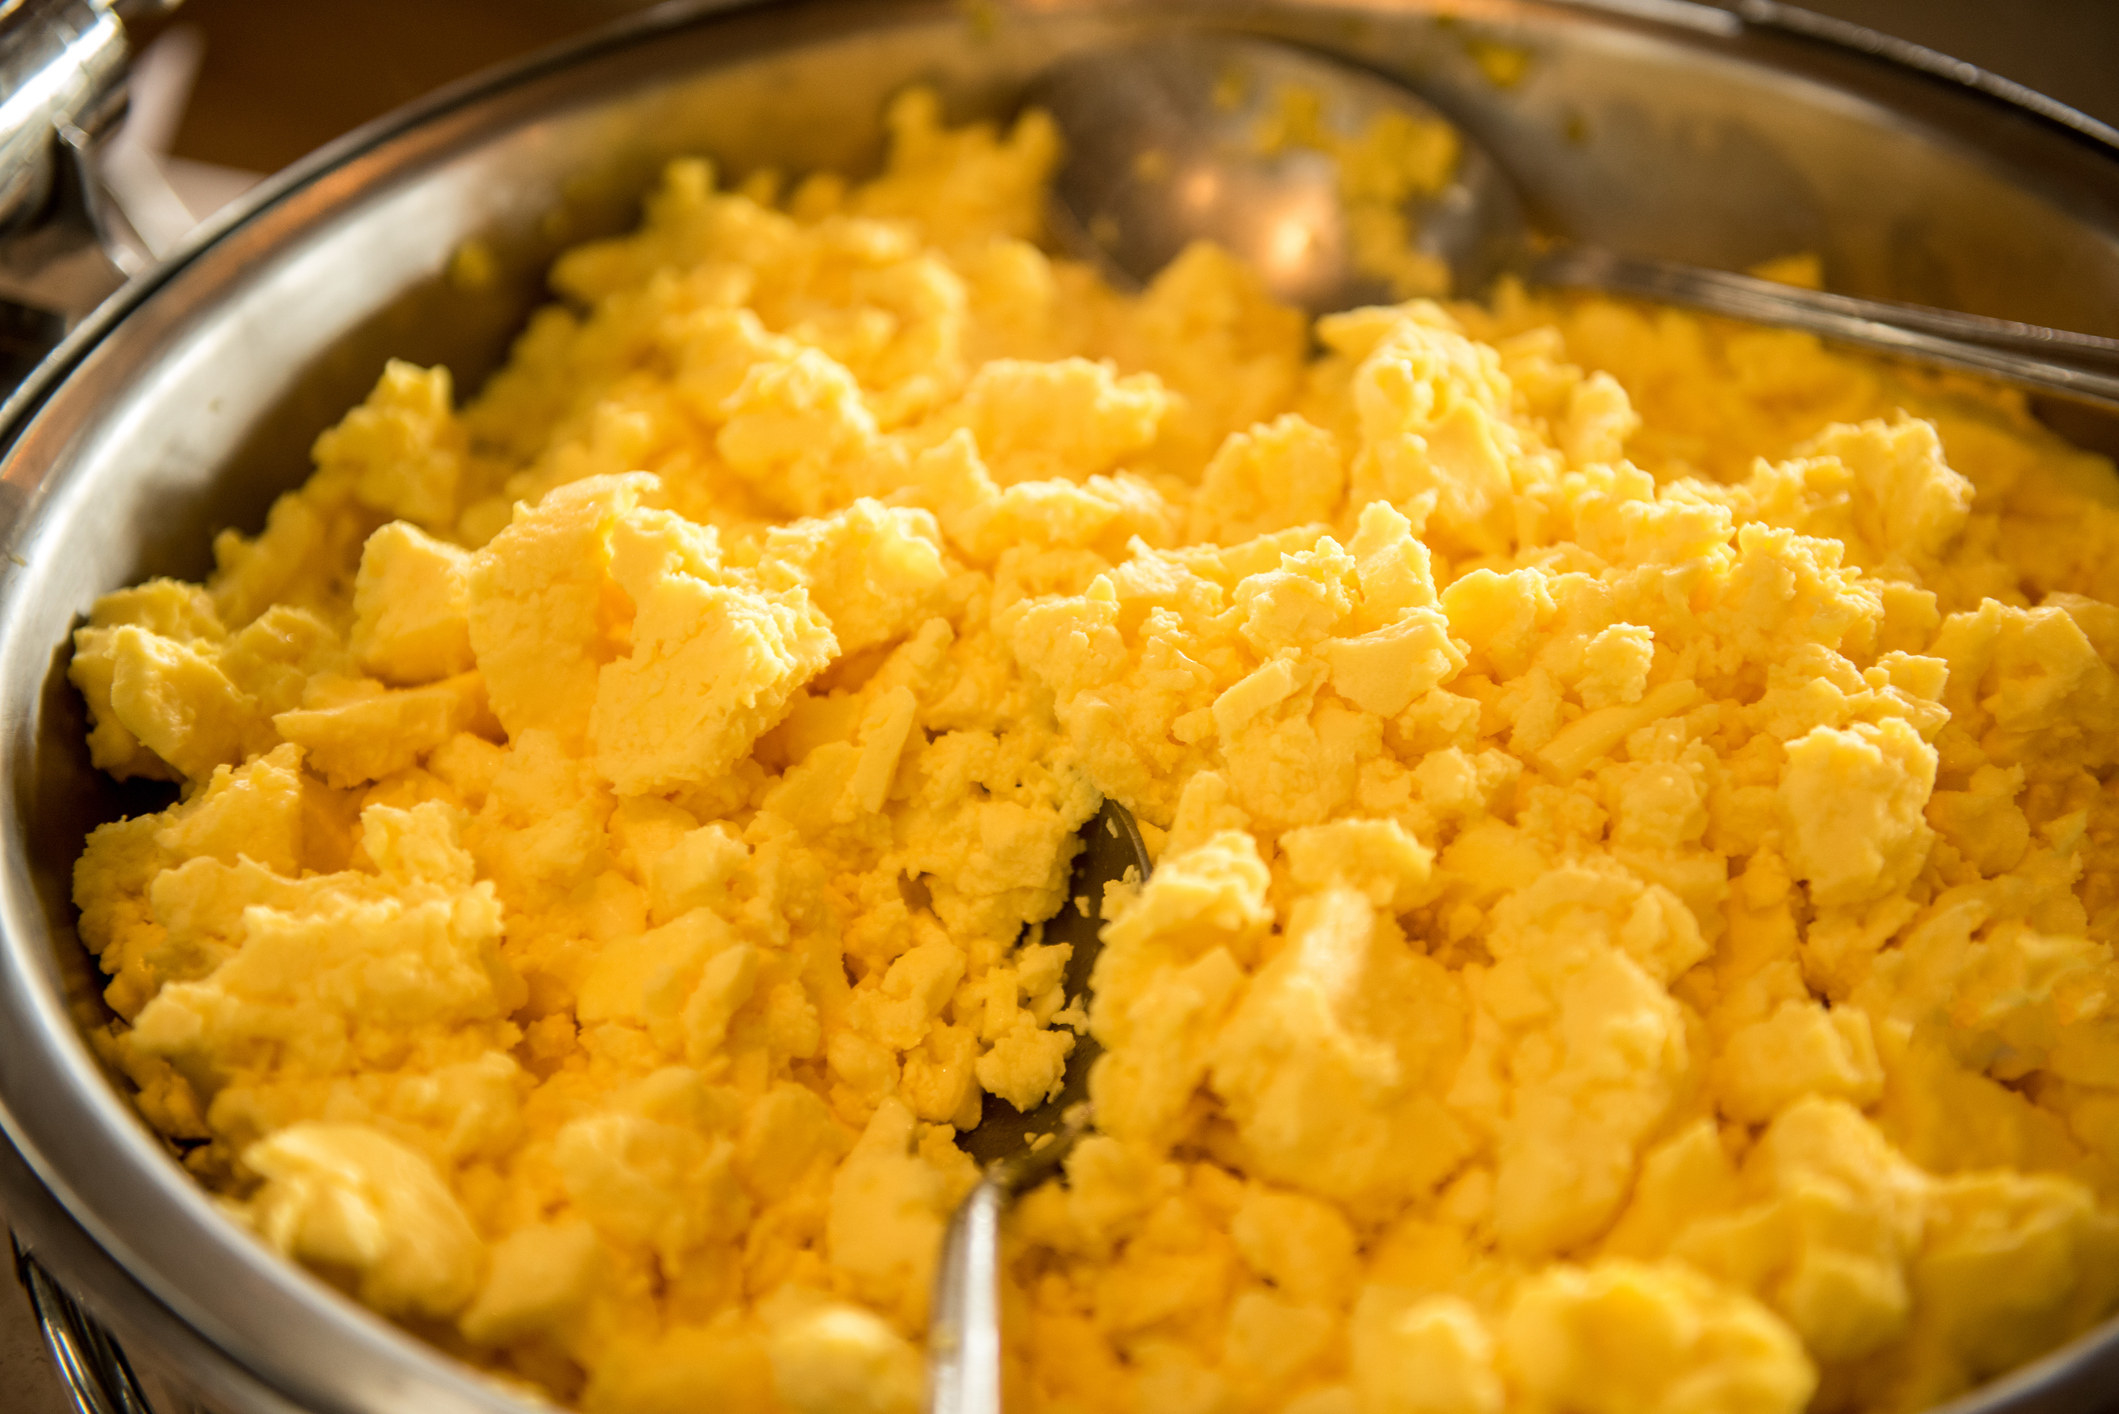 Well-cooked scrambled eggs